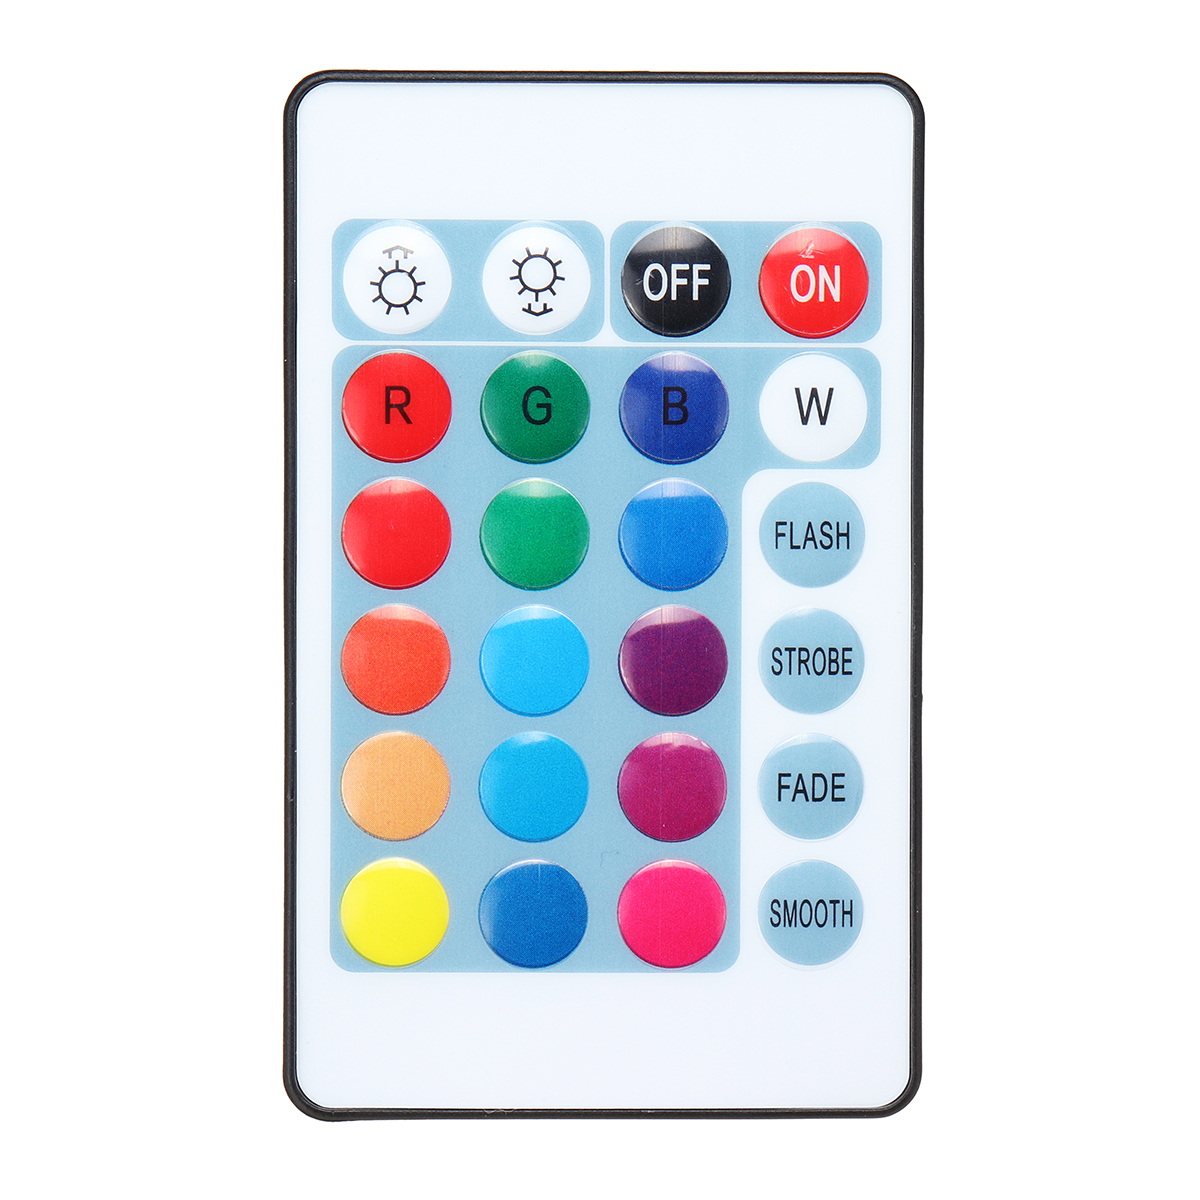 3D-Acrylic-LED-716-Colors-Colorful-Night-Lights-Elephant-Model-Remote-Control-Touch-Switch-Night-Lig-1370467-17